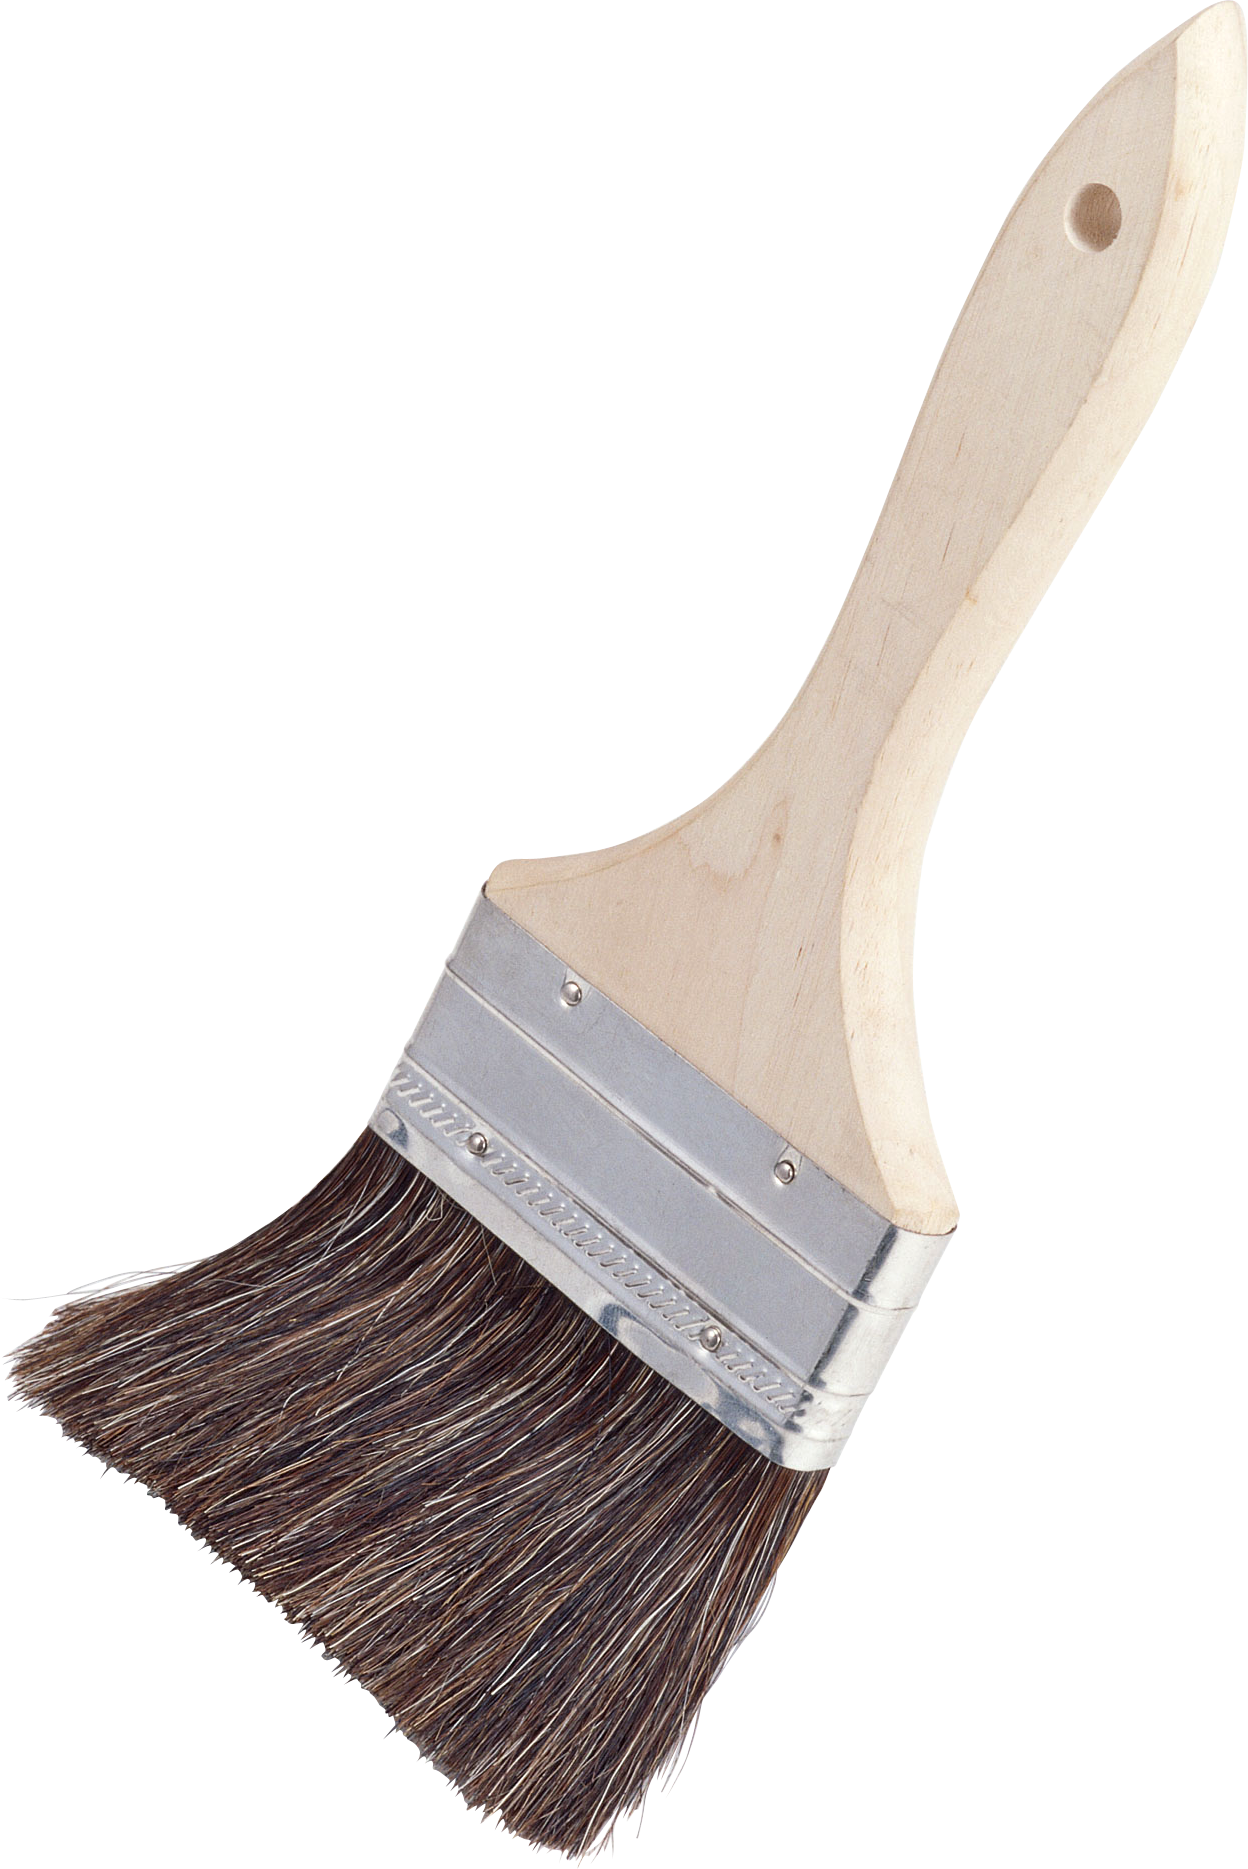 Paint Brush PNG Background Image